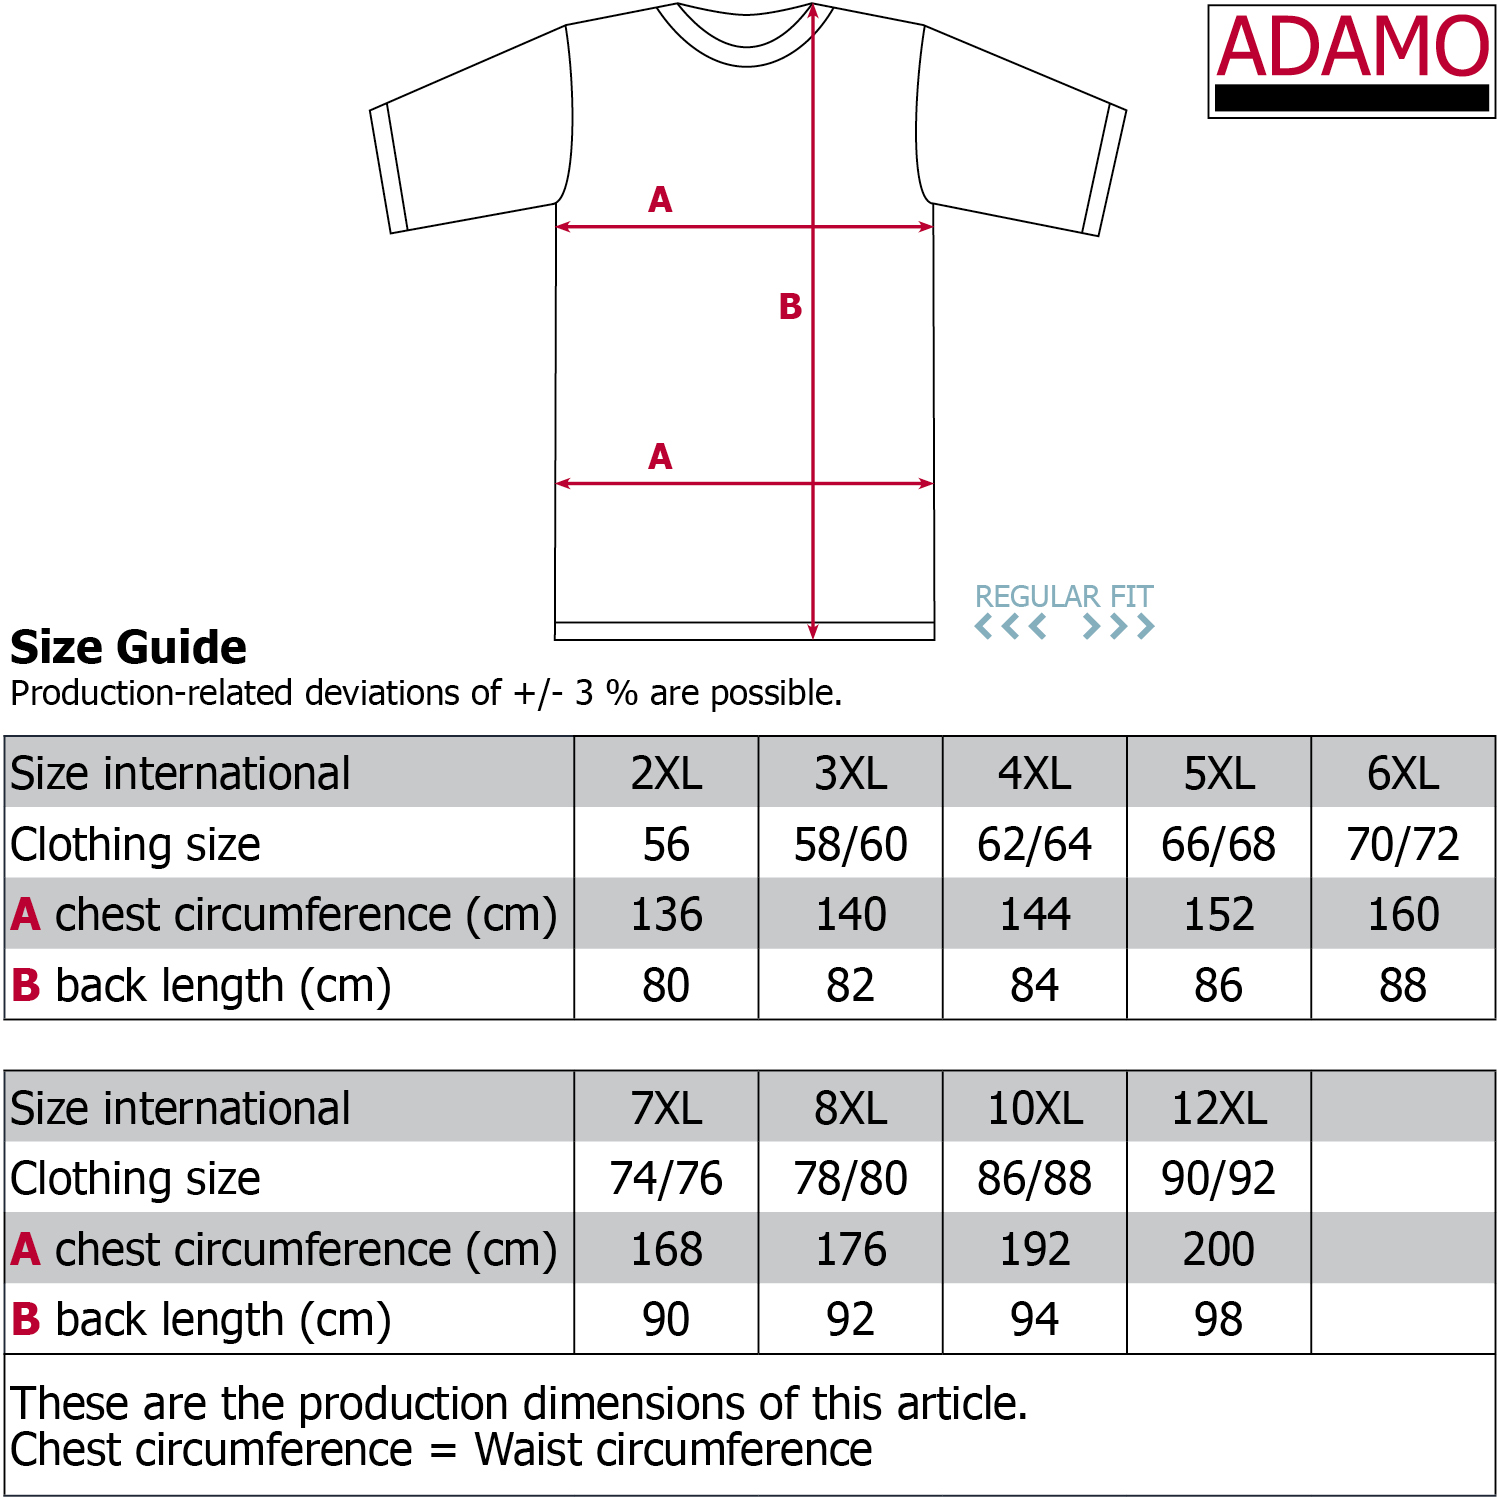 Adamo short sleeve shirt with round neck heavy jersey series Bud regular fit to plus size 12XL